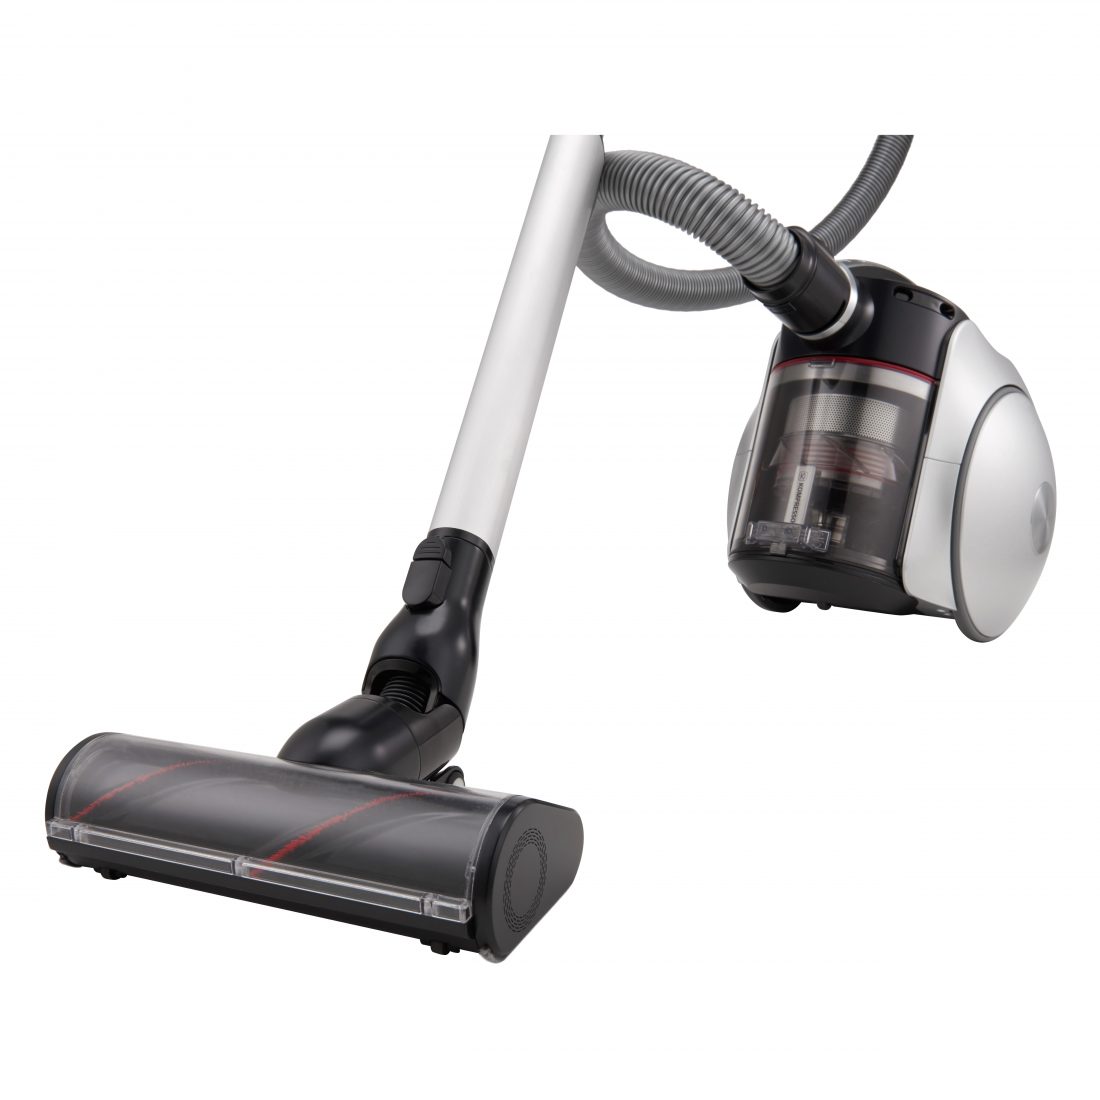 Close-up view of the LG CordZero Canister vacuum cleaner seen from a 15-degree angle